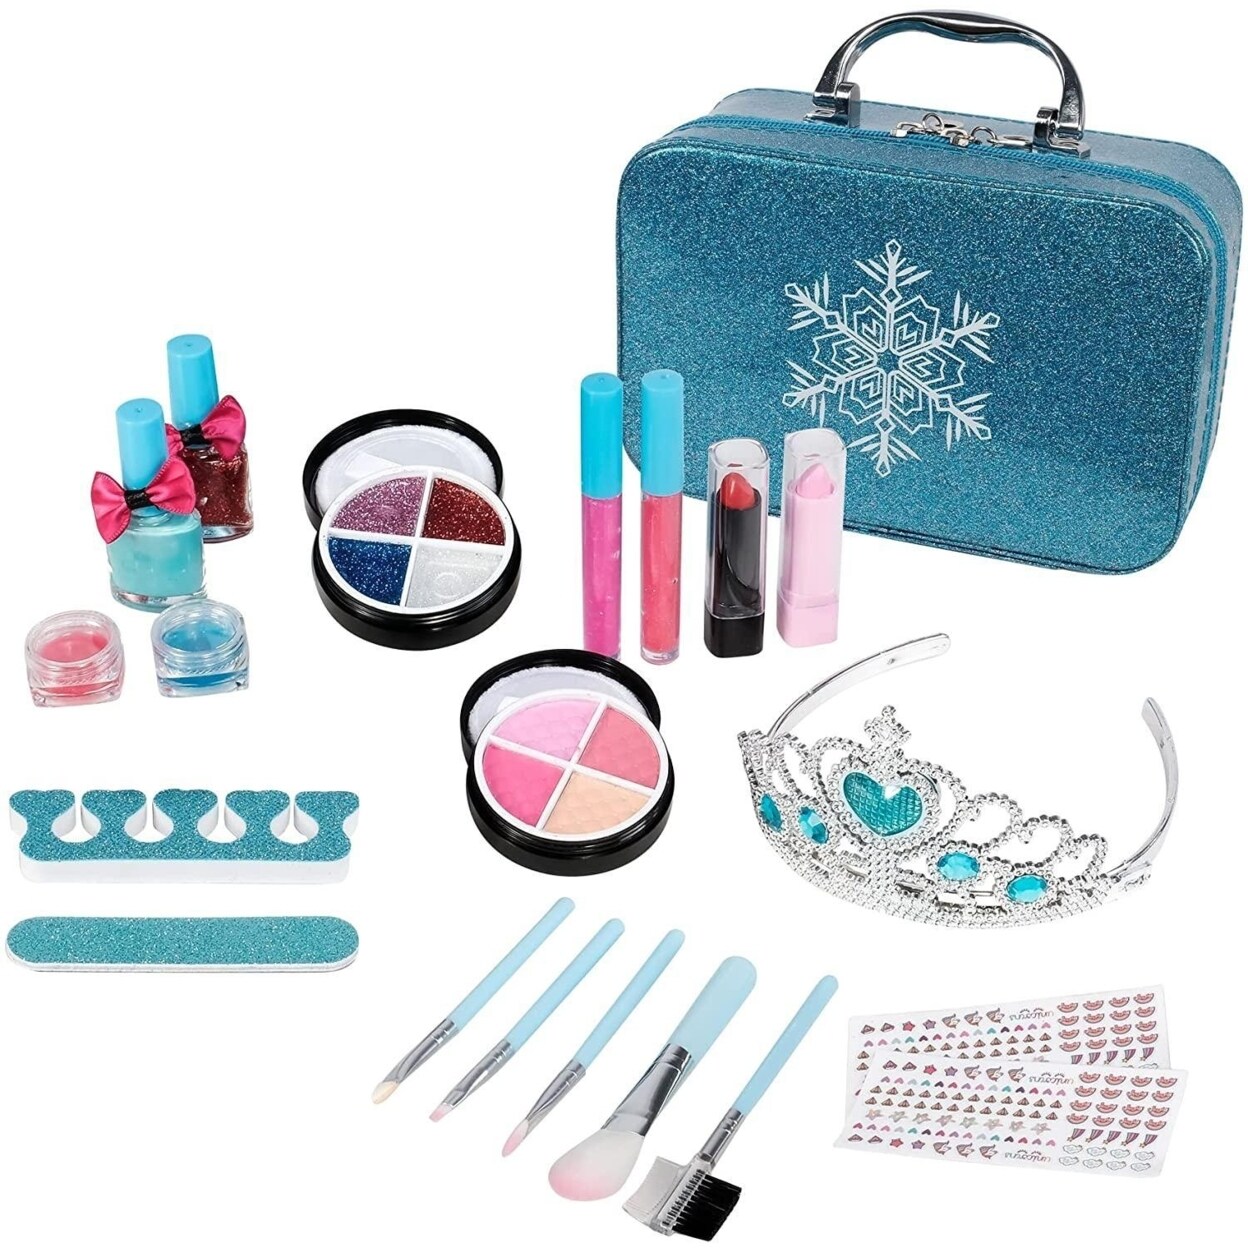 New Kids Makeup Kit for Girls Real Kids Washable Cosmetics Make Up Set  Princess Toy for Little Girls Birthday Gift